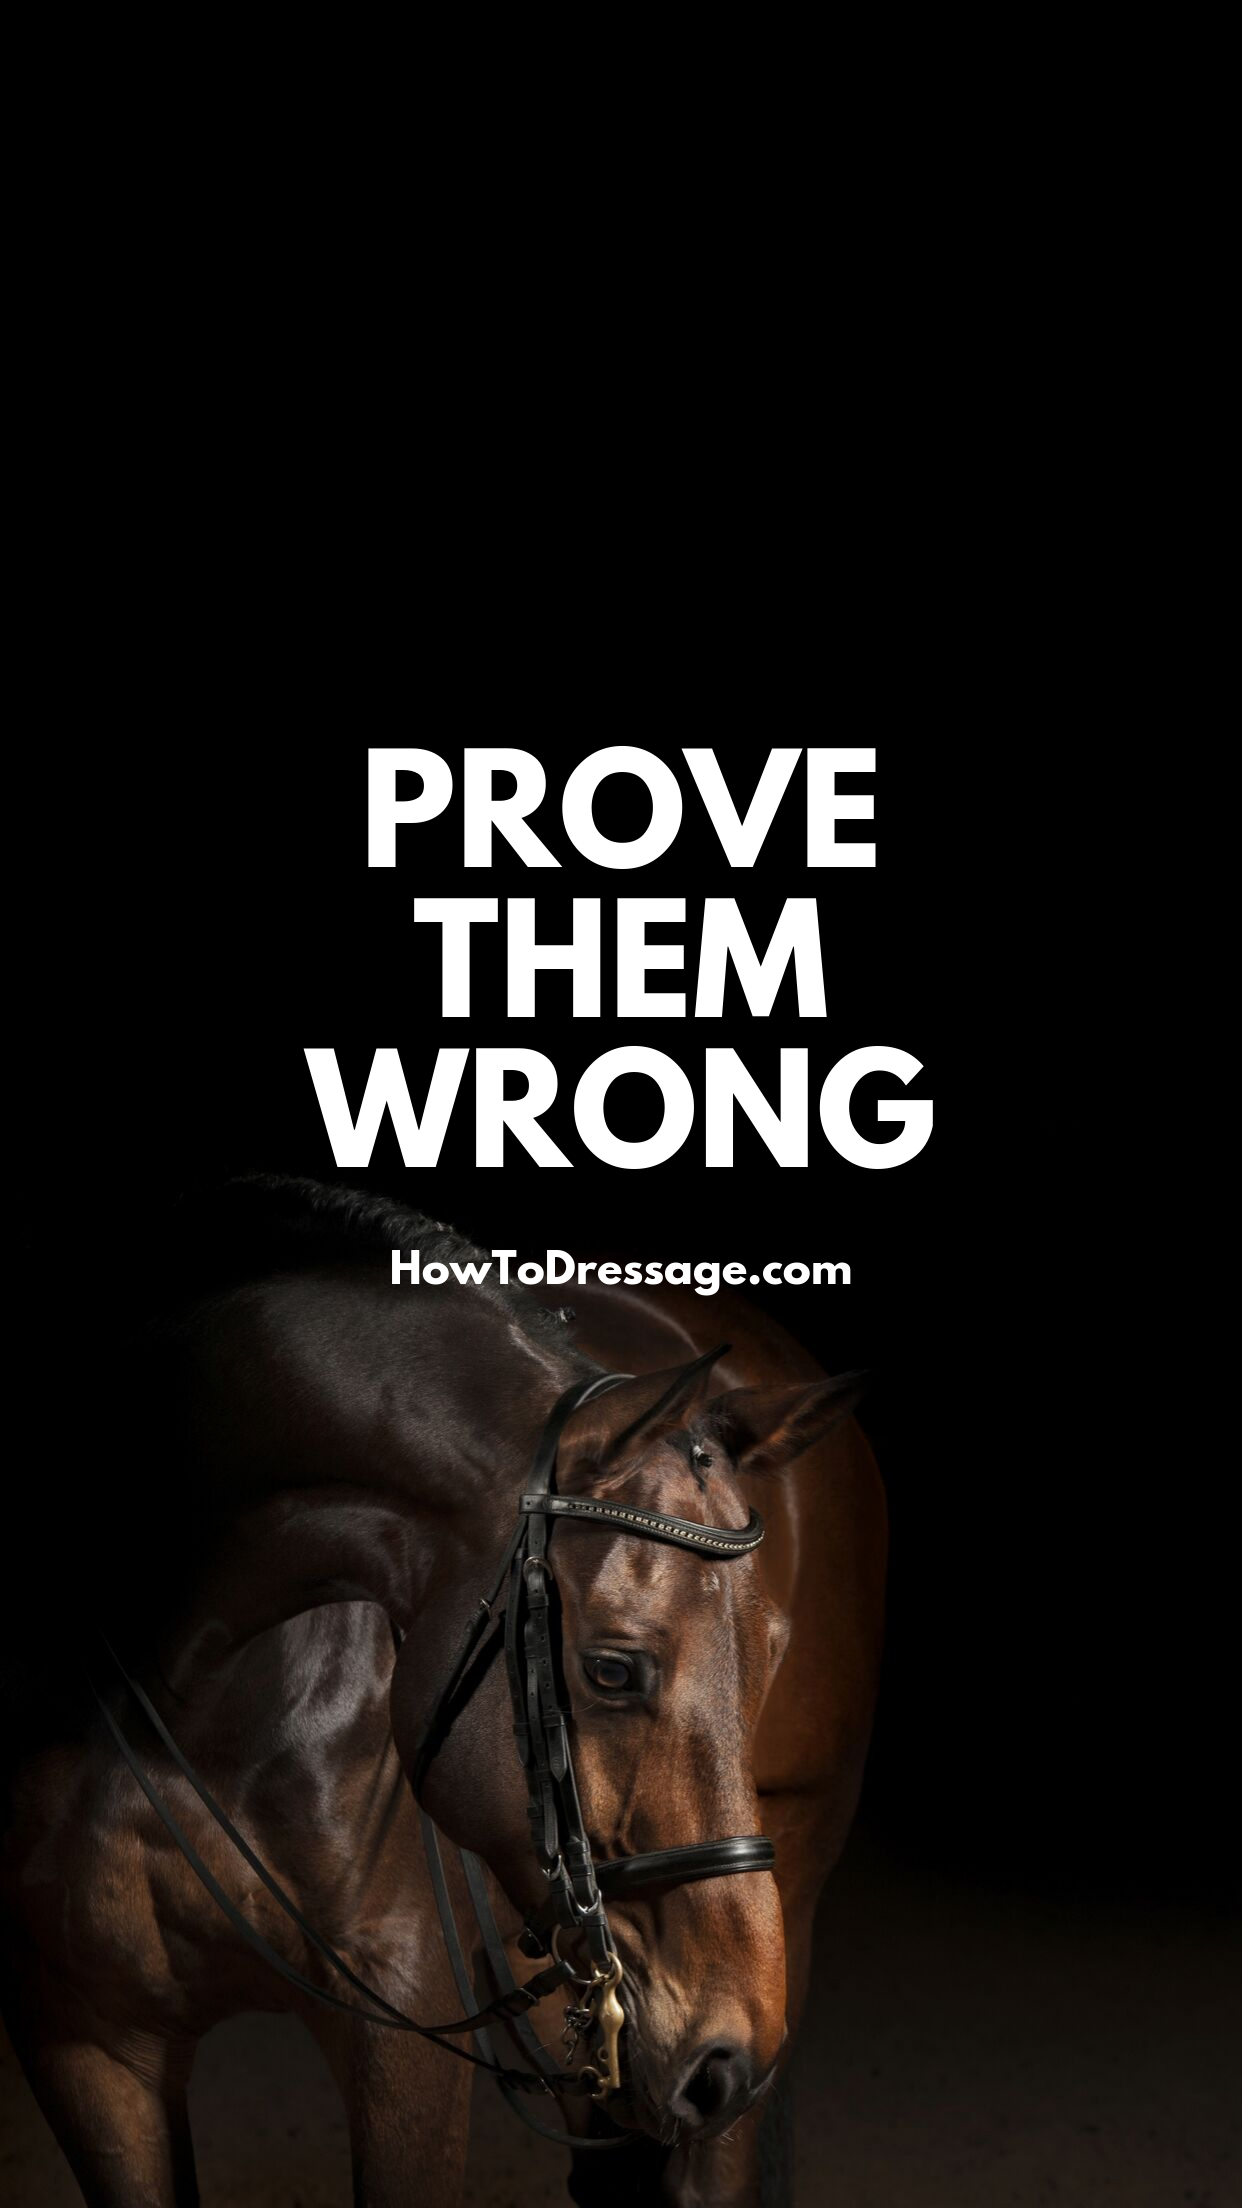 PROVE THEM WRONG WALLPAPER. Inspirational horse quotes, Equestrian quotes, Horse quotes